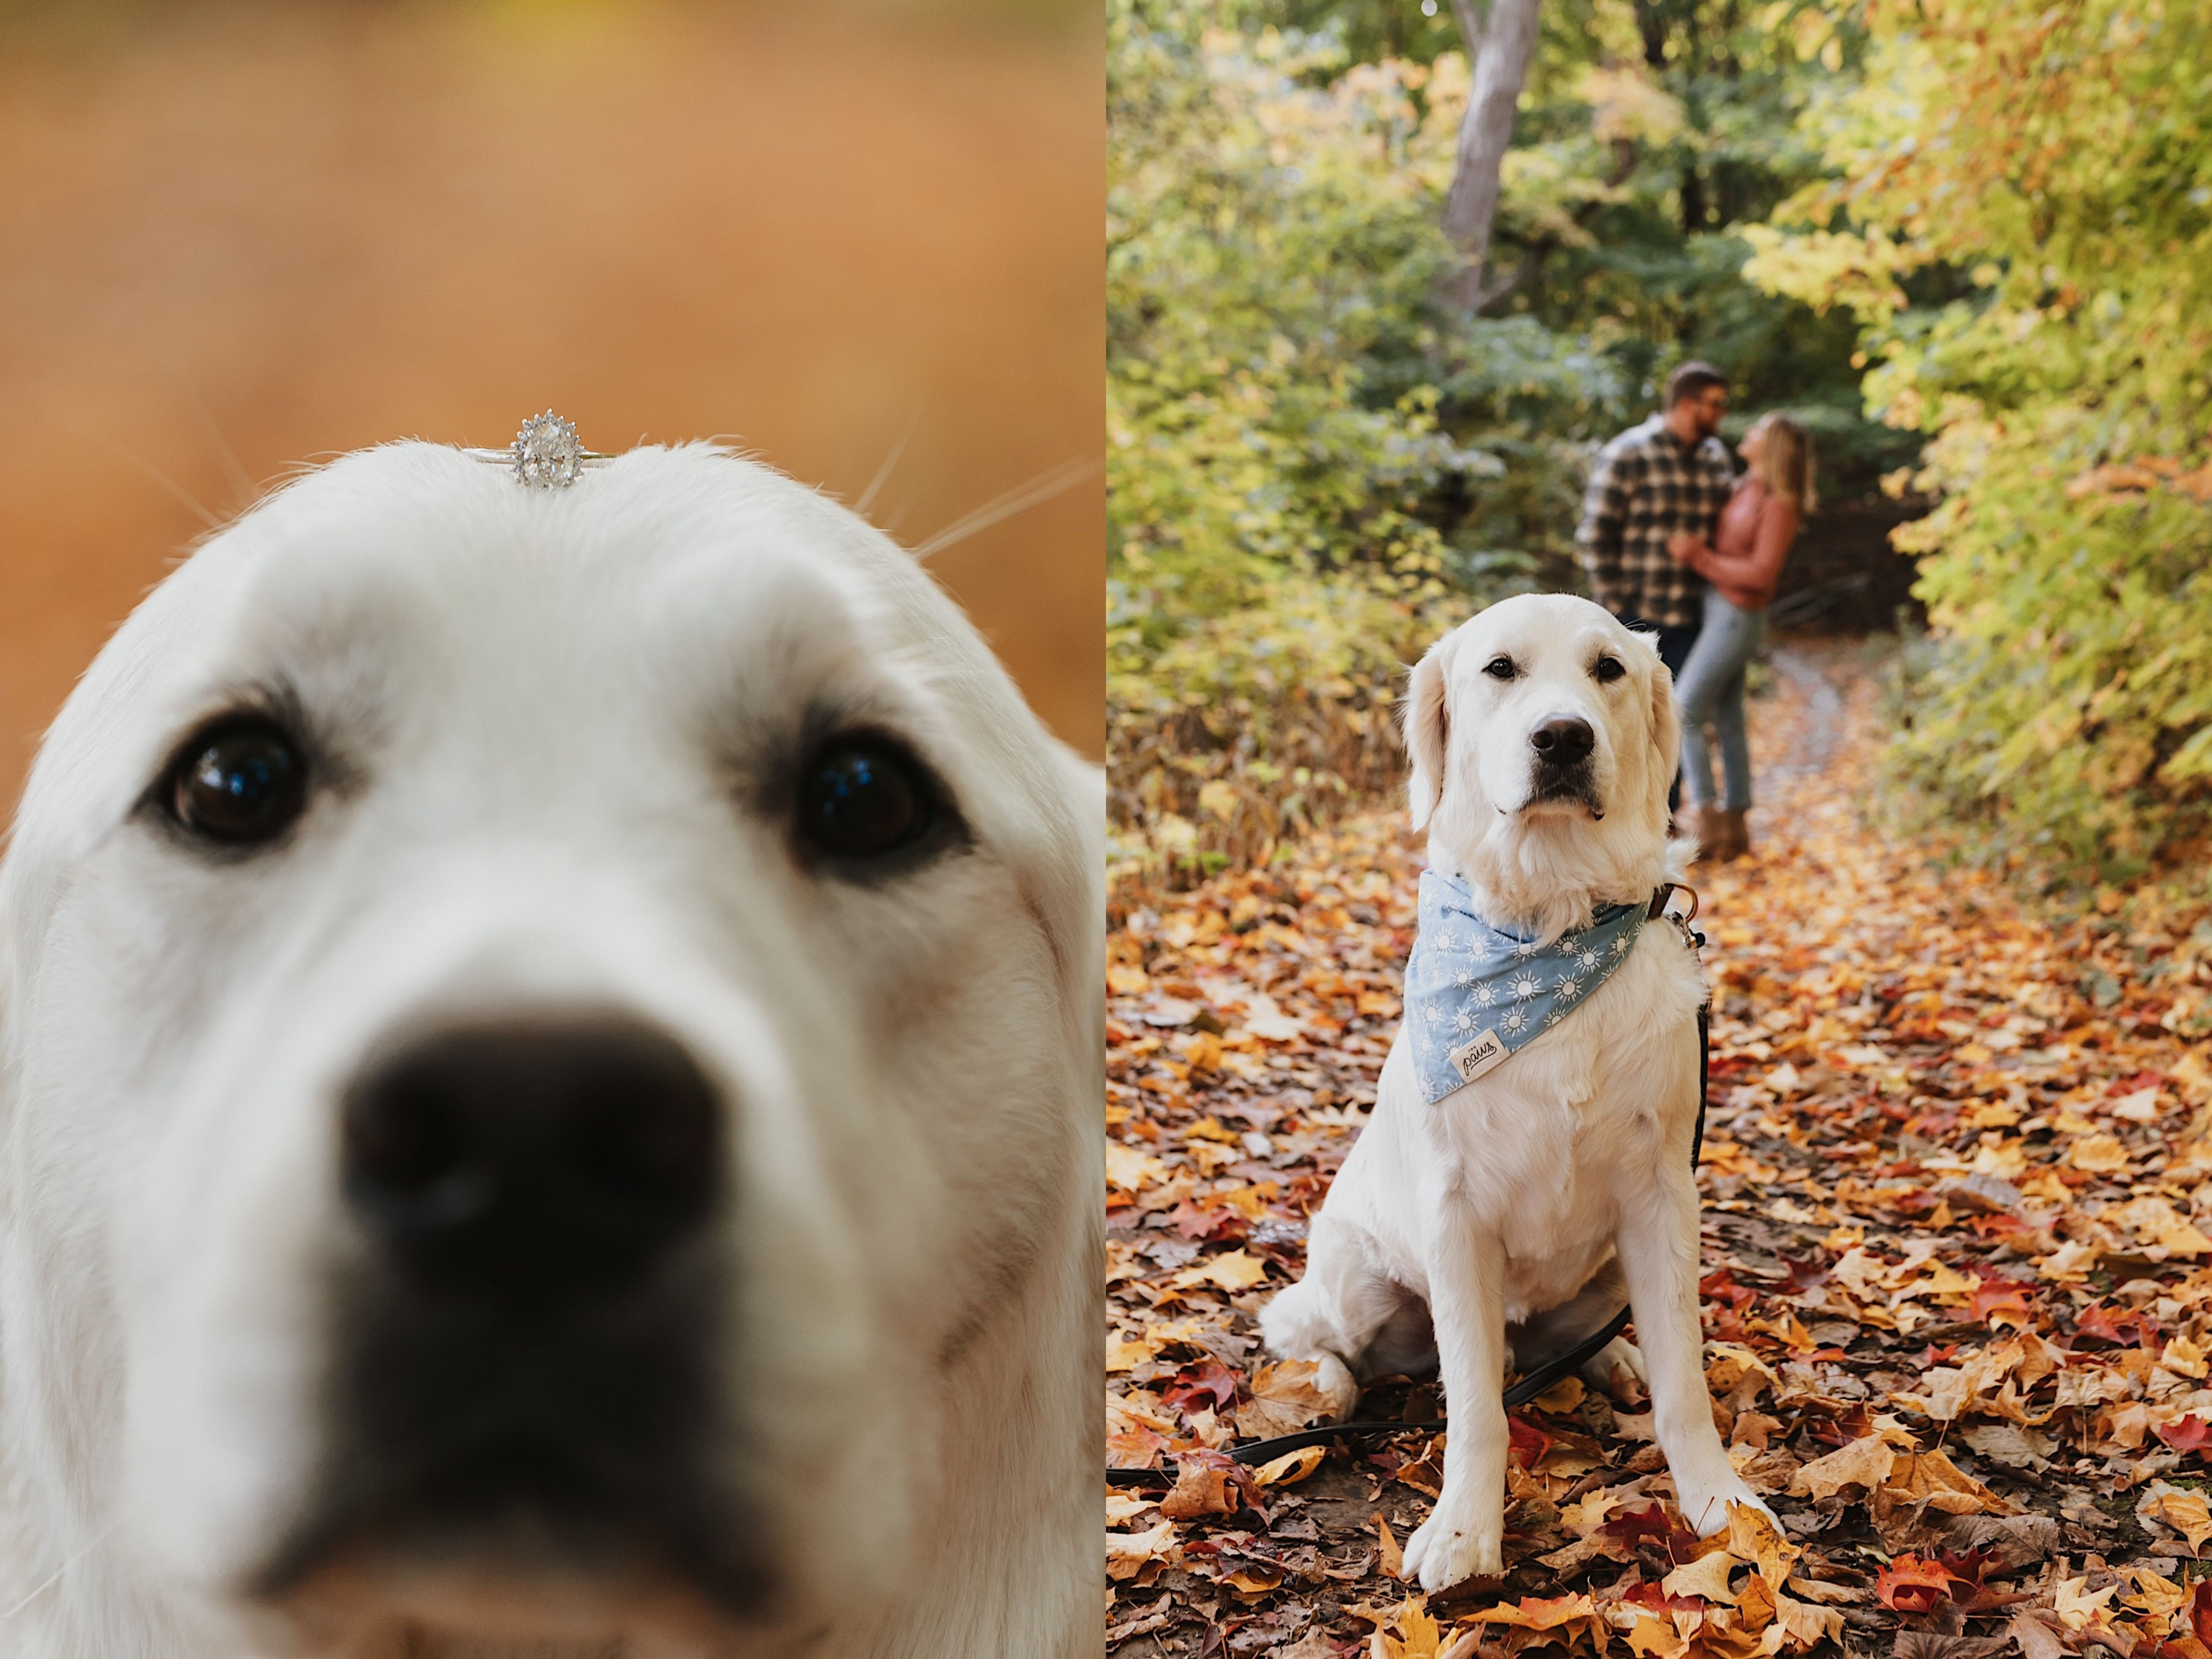 Two photos side by side, the left is of a dog with an engagement ring resting on his head, the right is of that same dog sitting on a trail covered in leaves with a man and woman in the background embracing one another